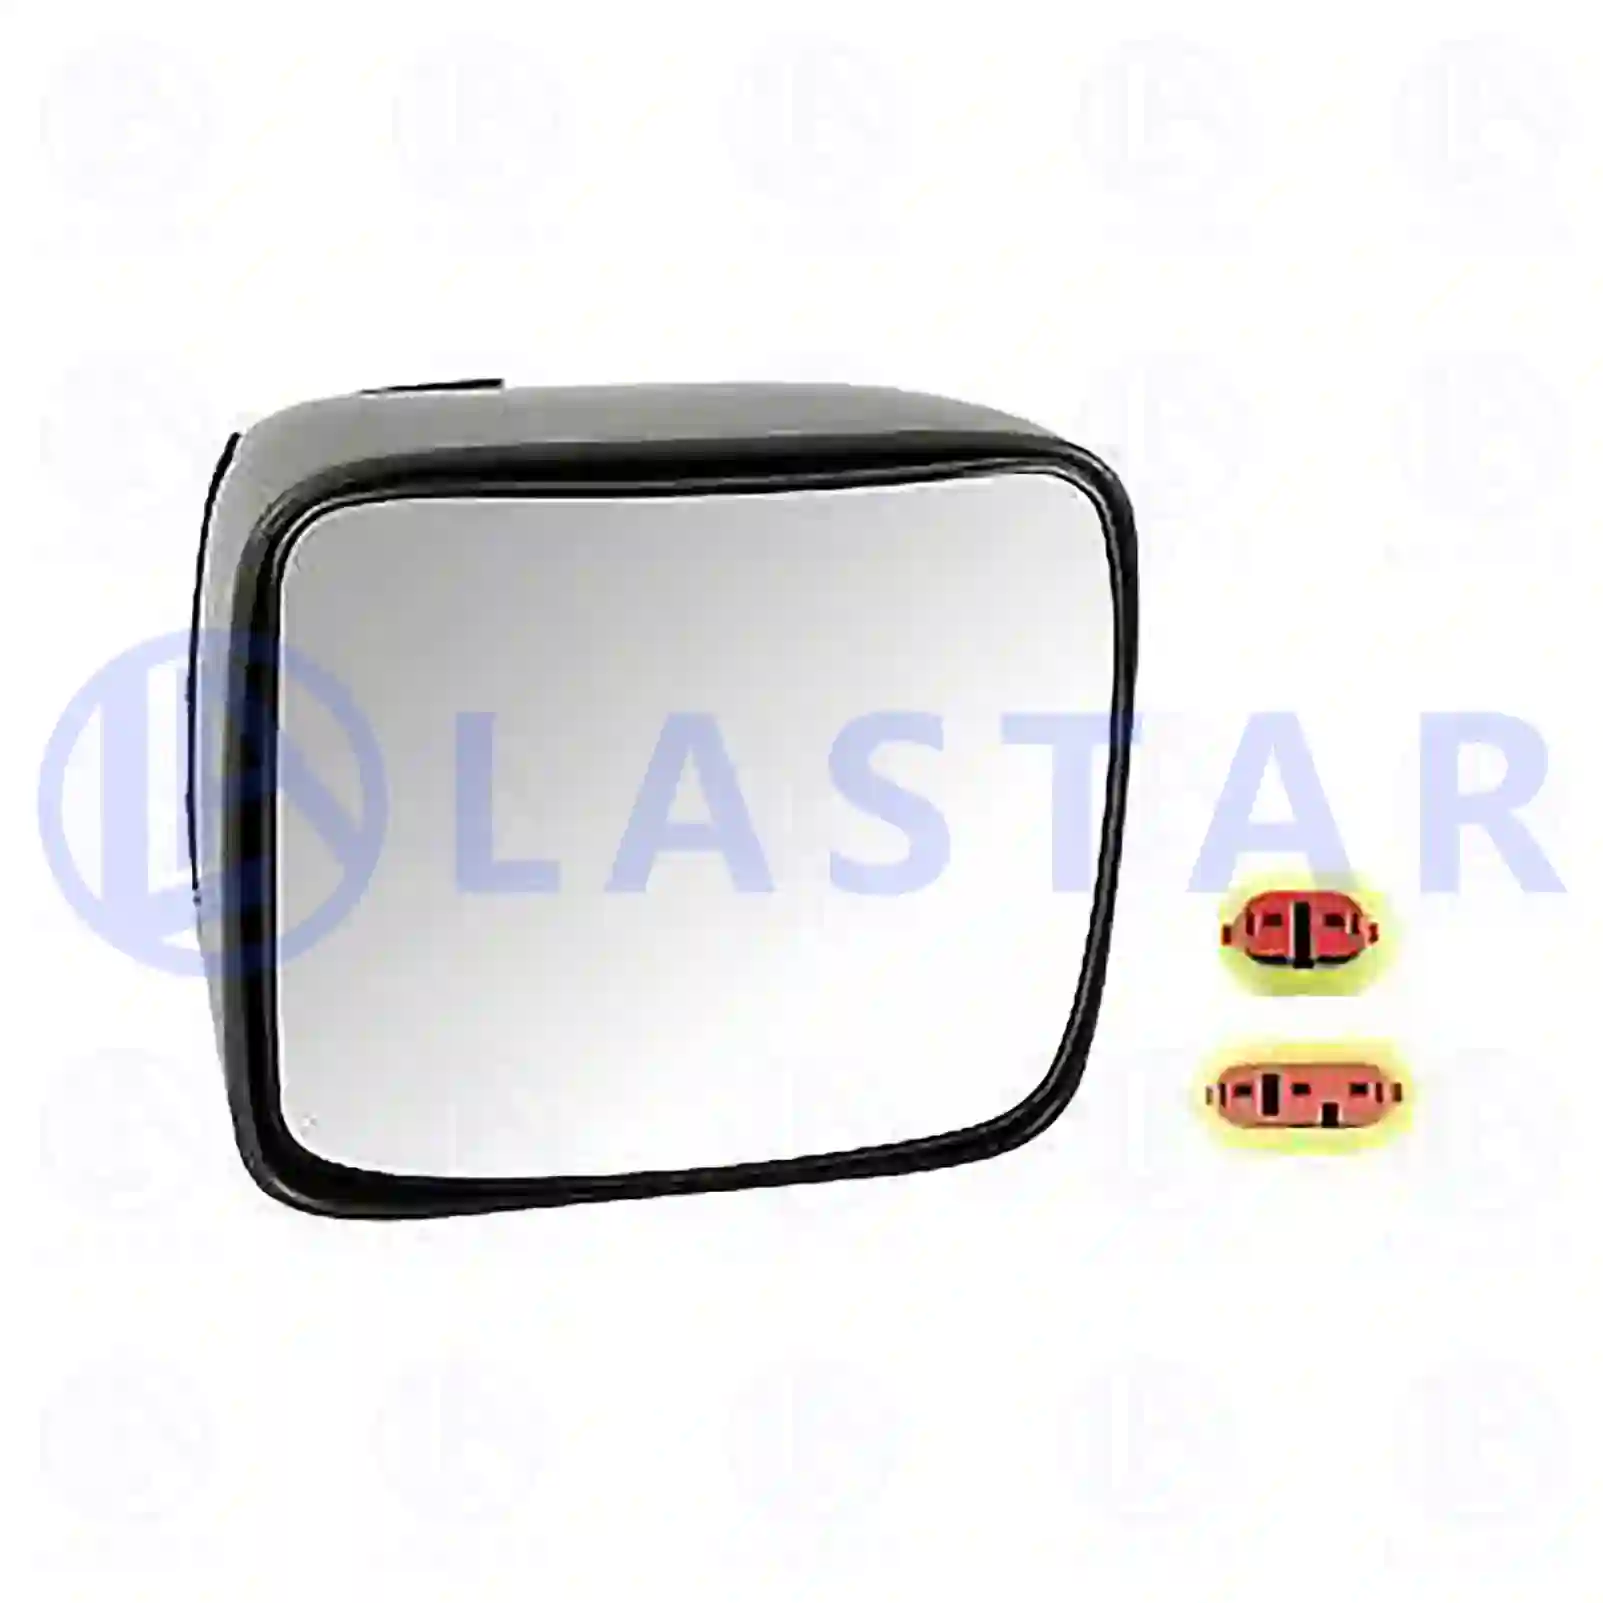  Wide view mirror, heated, electrical || Lastar Spare Part | Truck Spare Parts, Auotomotive Spare Parts